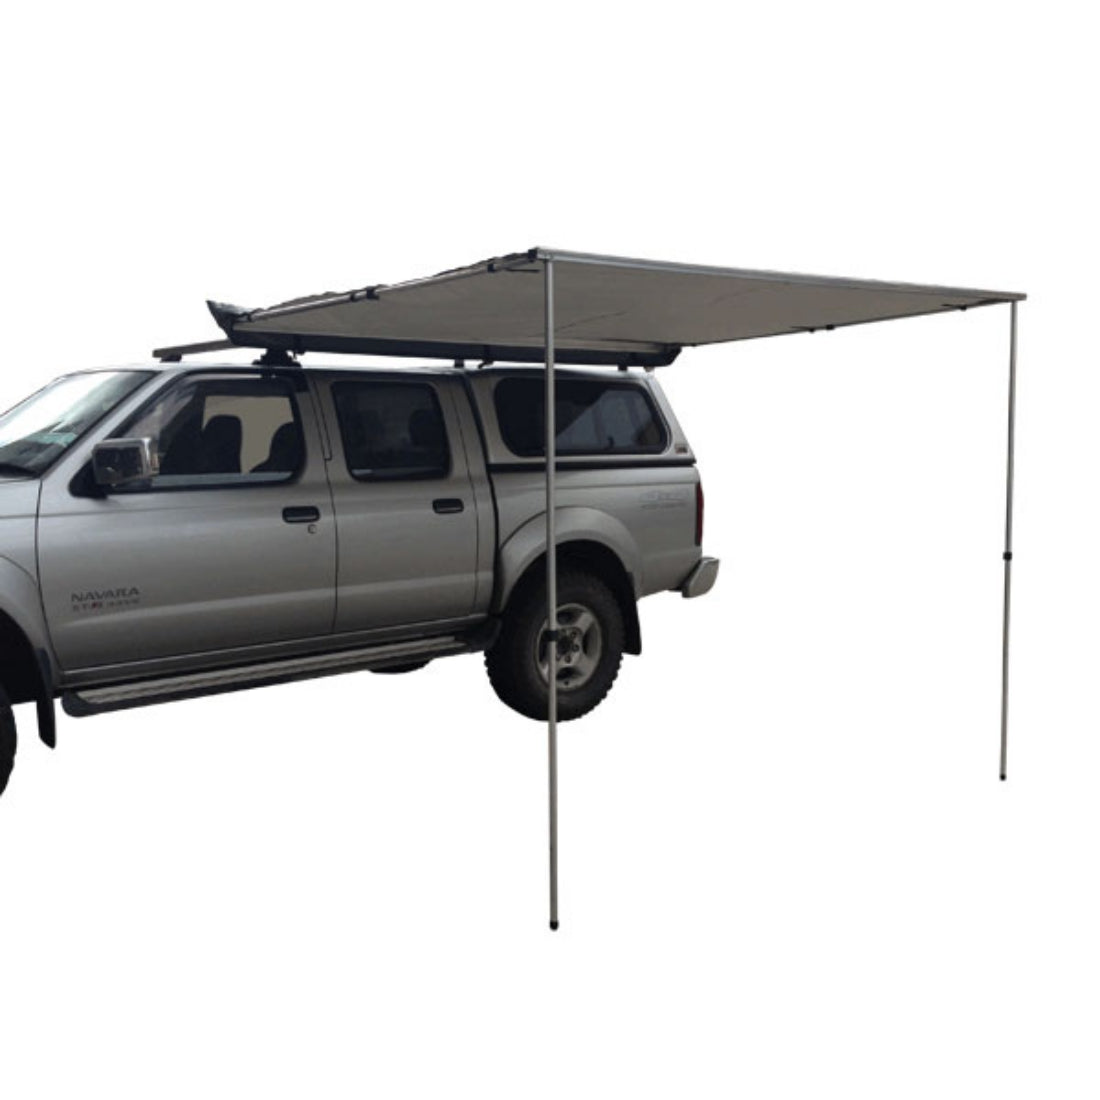 1.6m x 2.5m 4WD Waterproof Pull Out Car Awning Shade